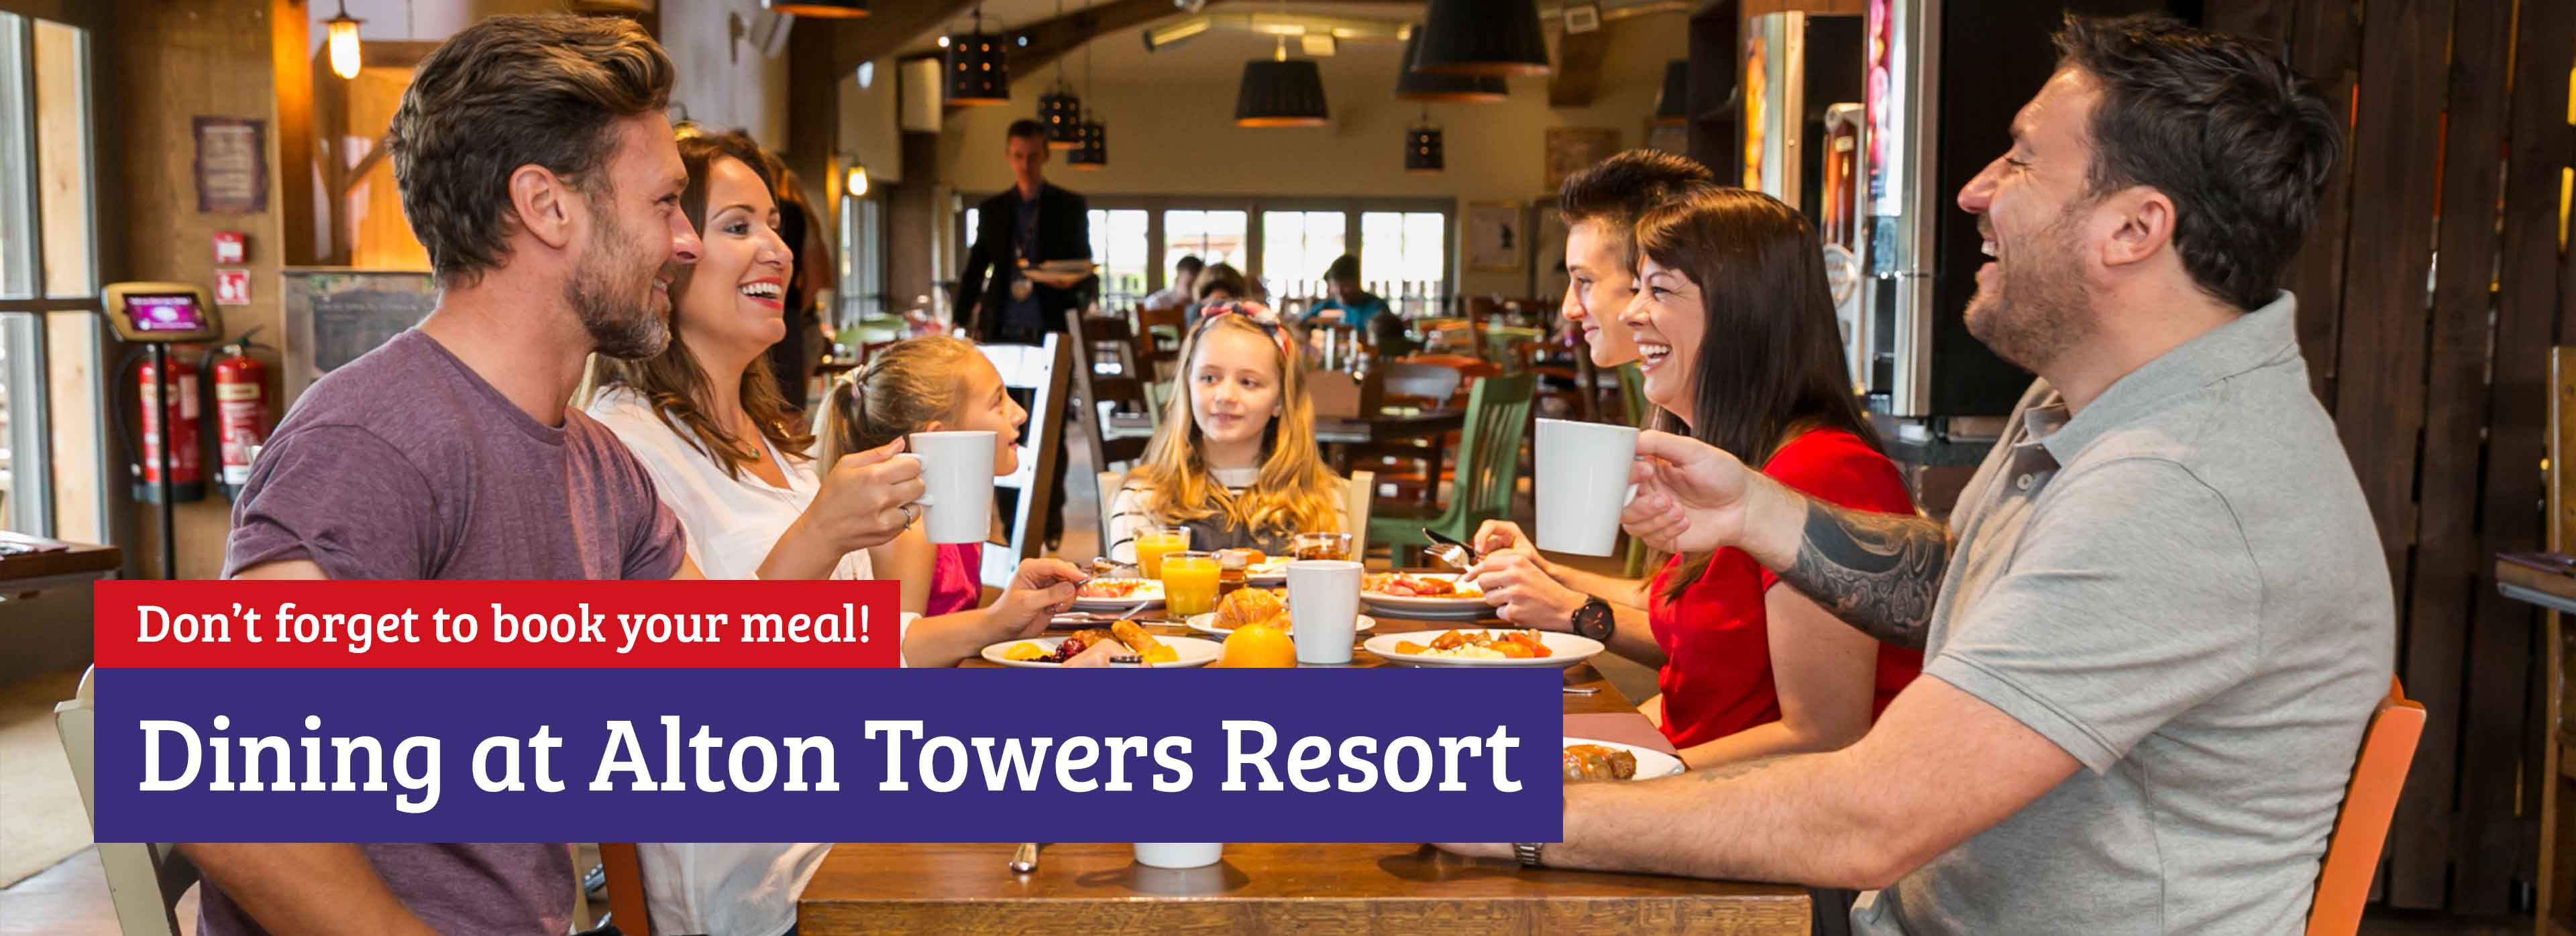 Choose your restaurant and book your meals for your short break at Alton Towers Resort